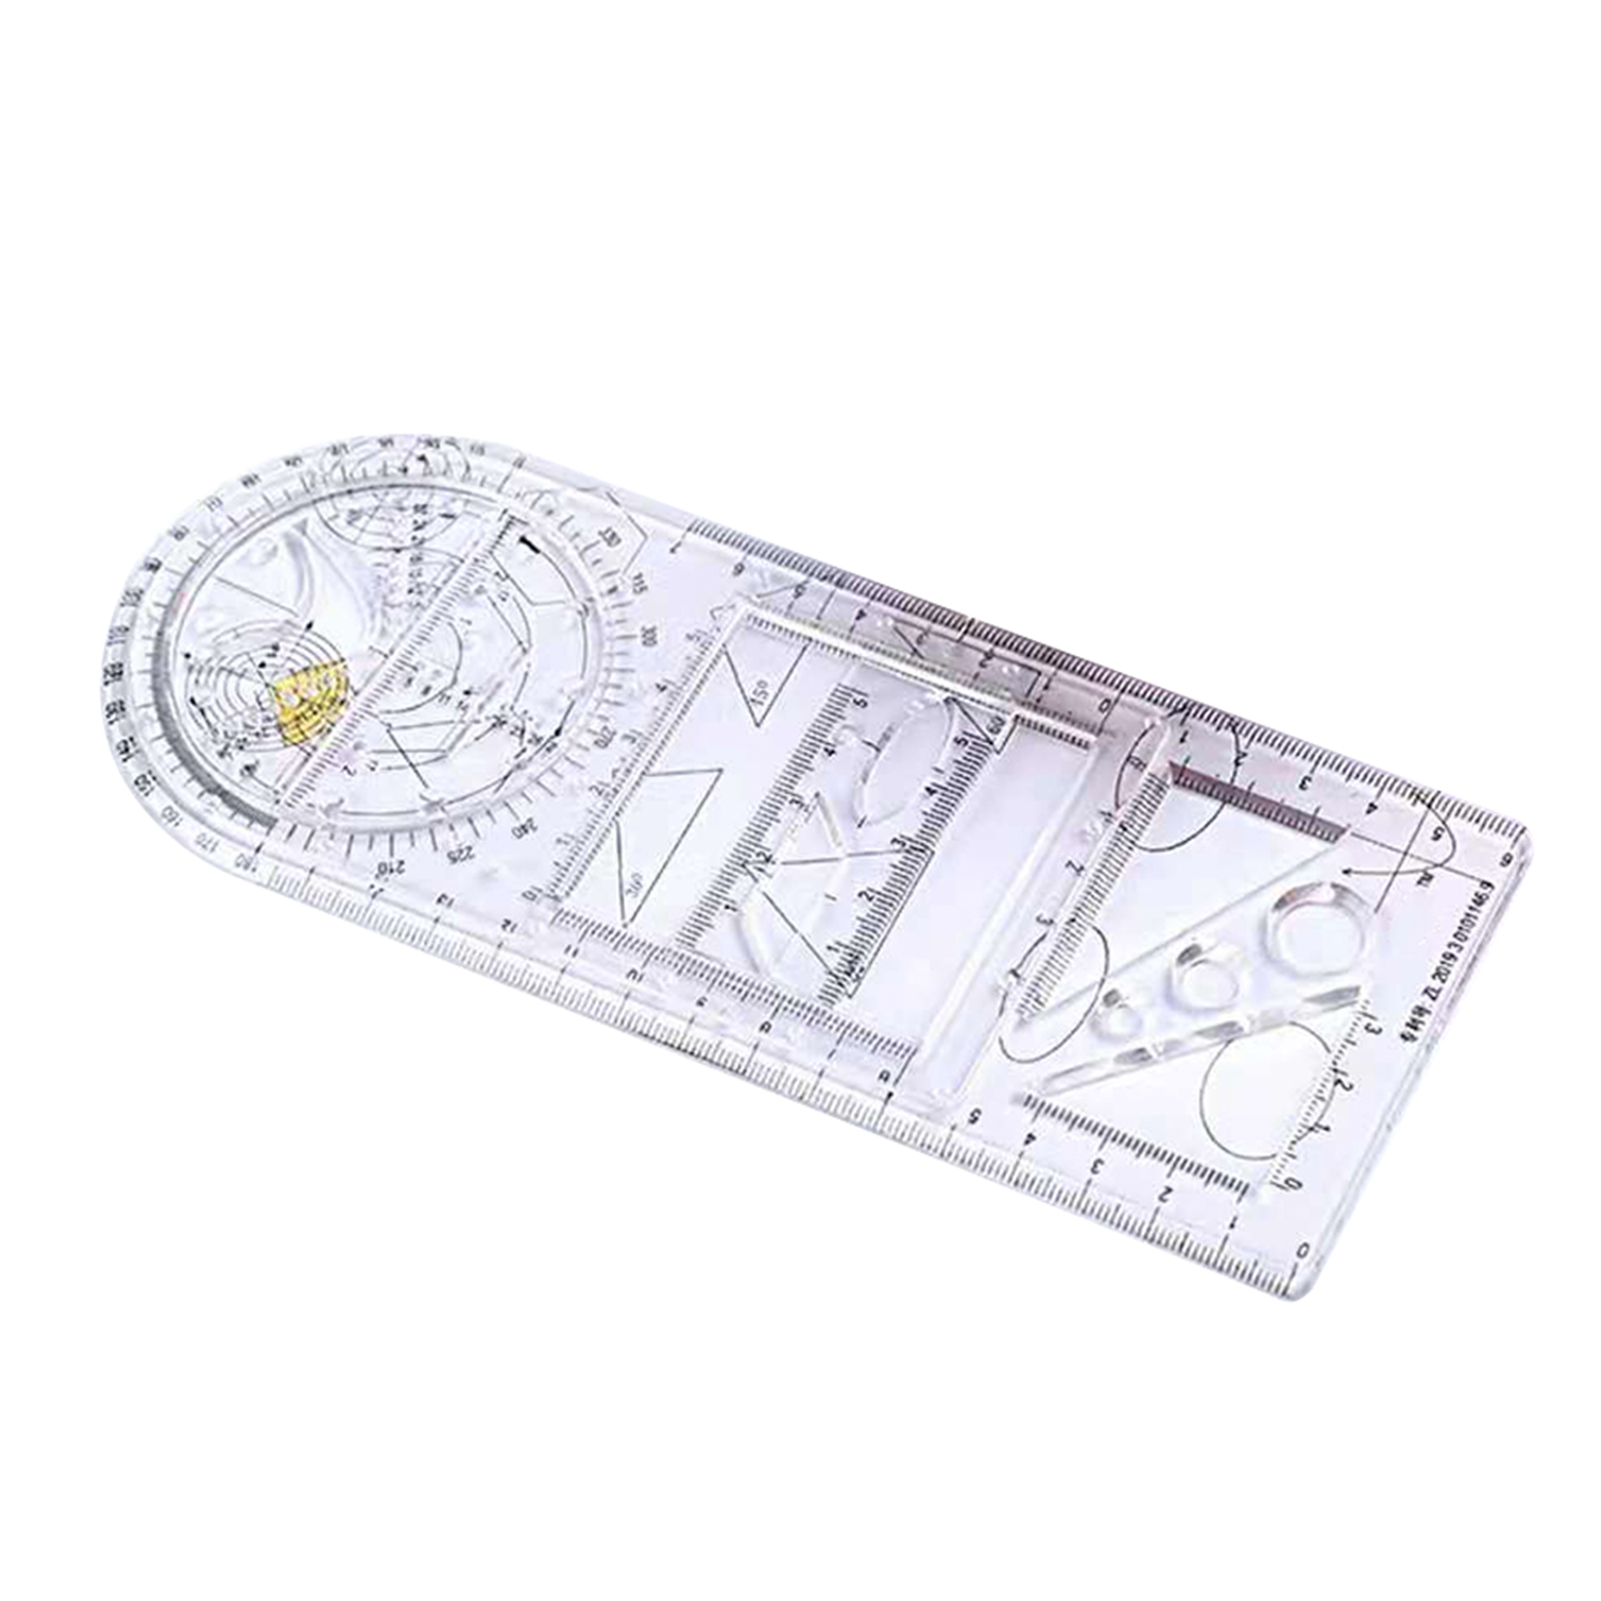 Multifunctional Geometric Ruler Geometric Drawing Template Measuring Tool For School Office Architecture Supply